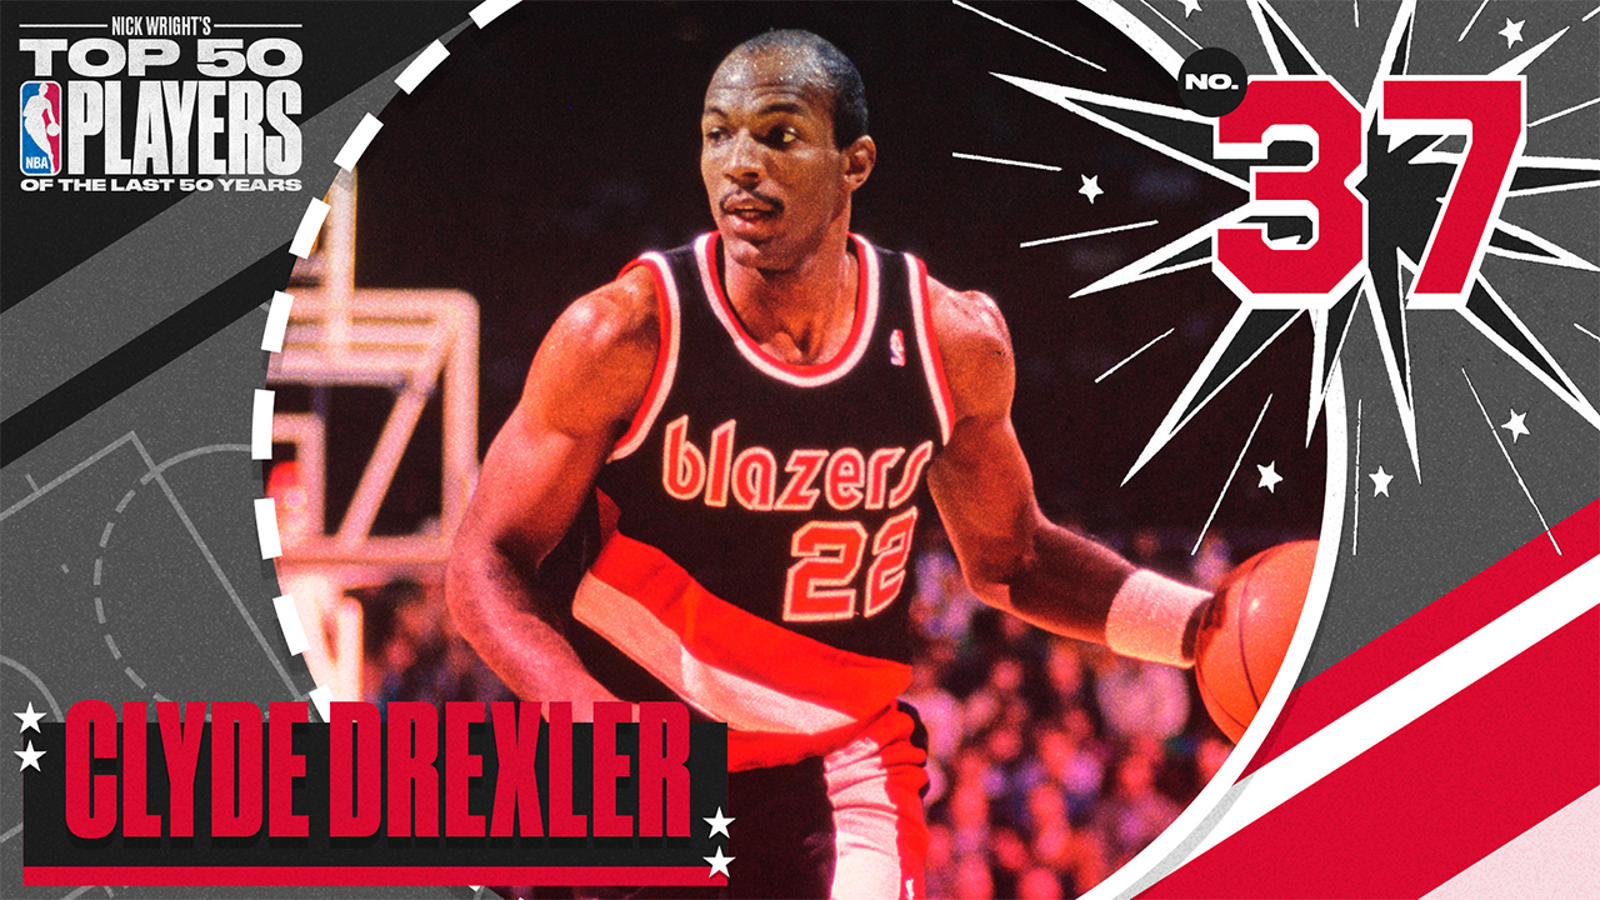 Clyde Drexler is Nick Wright's 37th Greatest NBA Player of the Last 50 Years